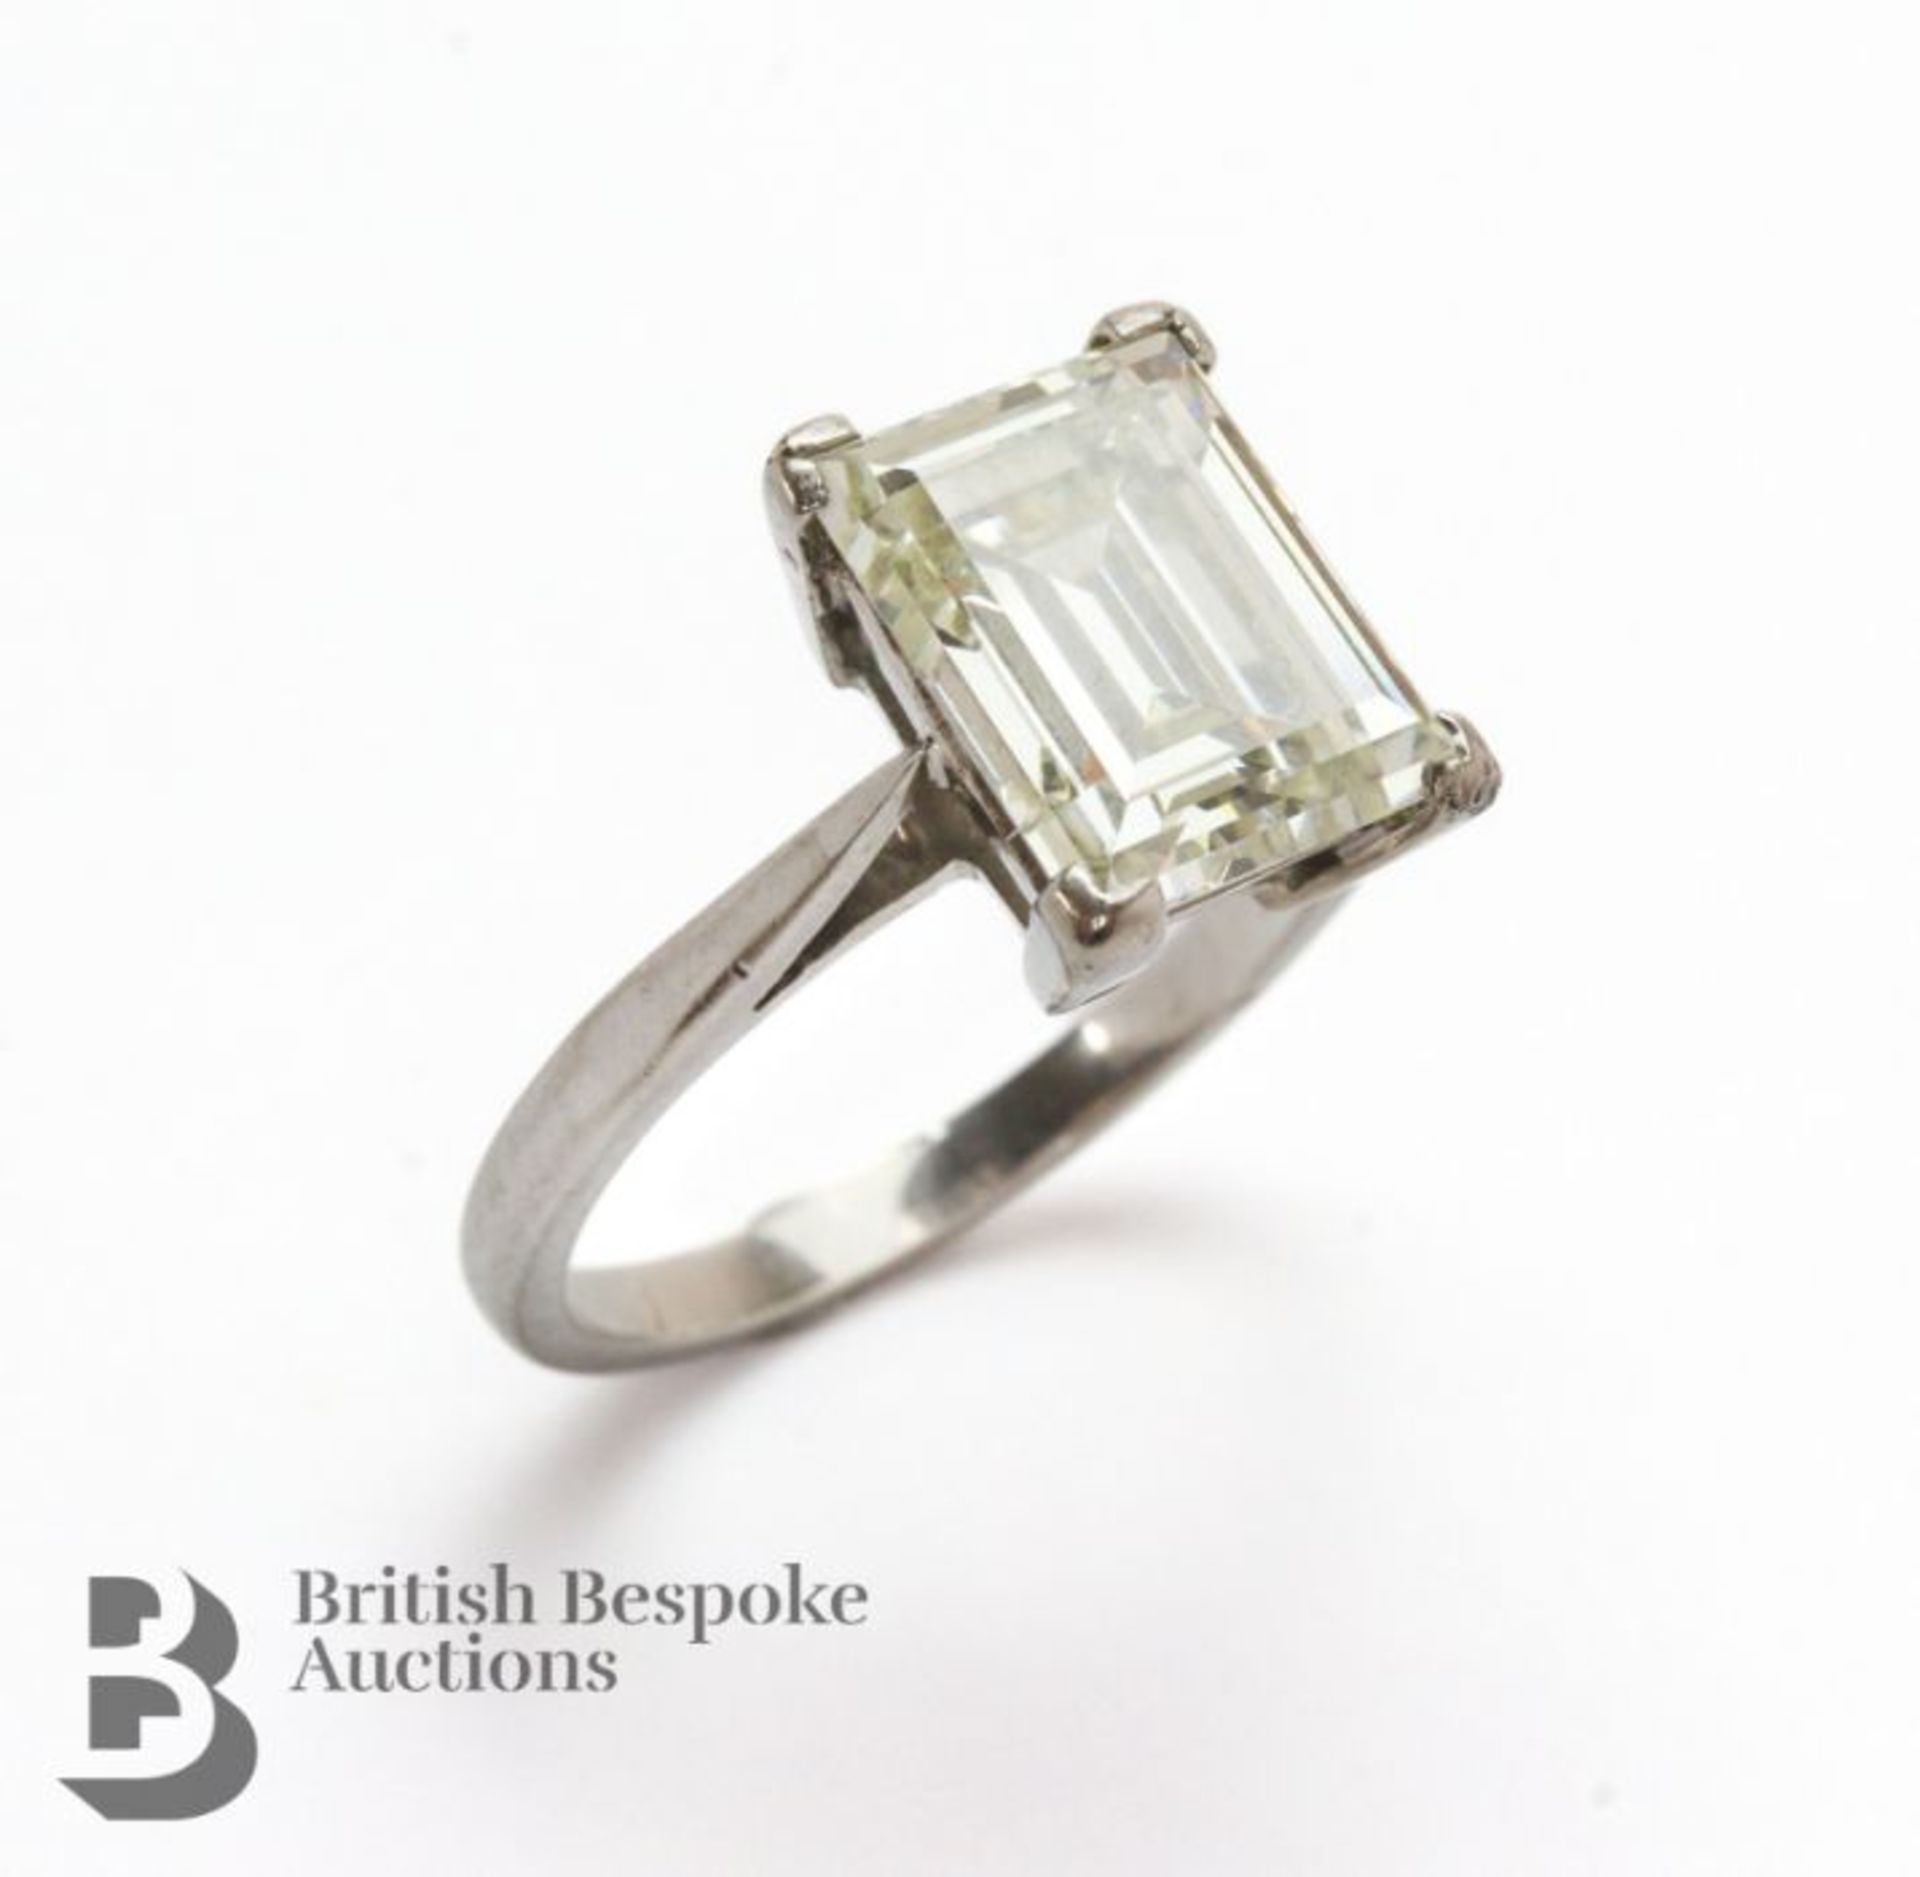 Stunning Vintage 18ct 4.39ct Solitaire Diamond Ring - Image 5 of 10